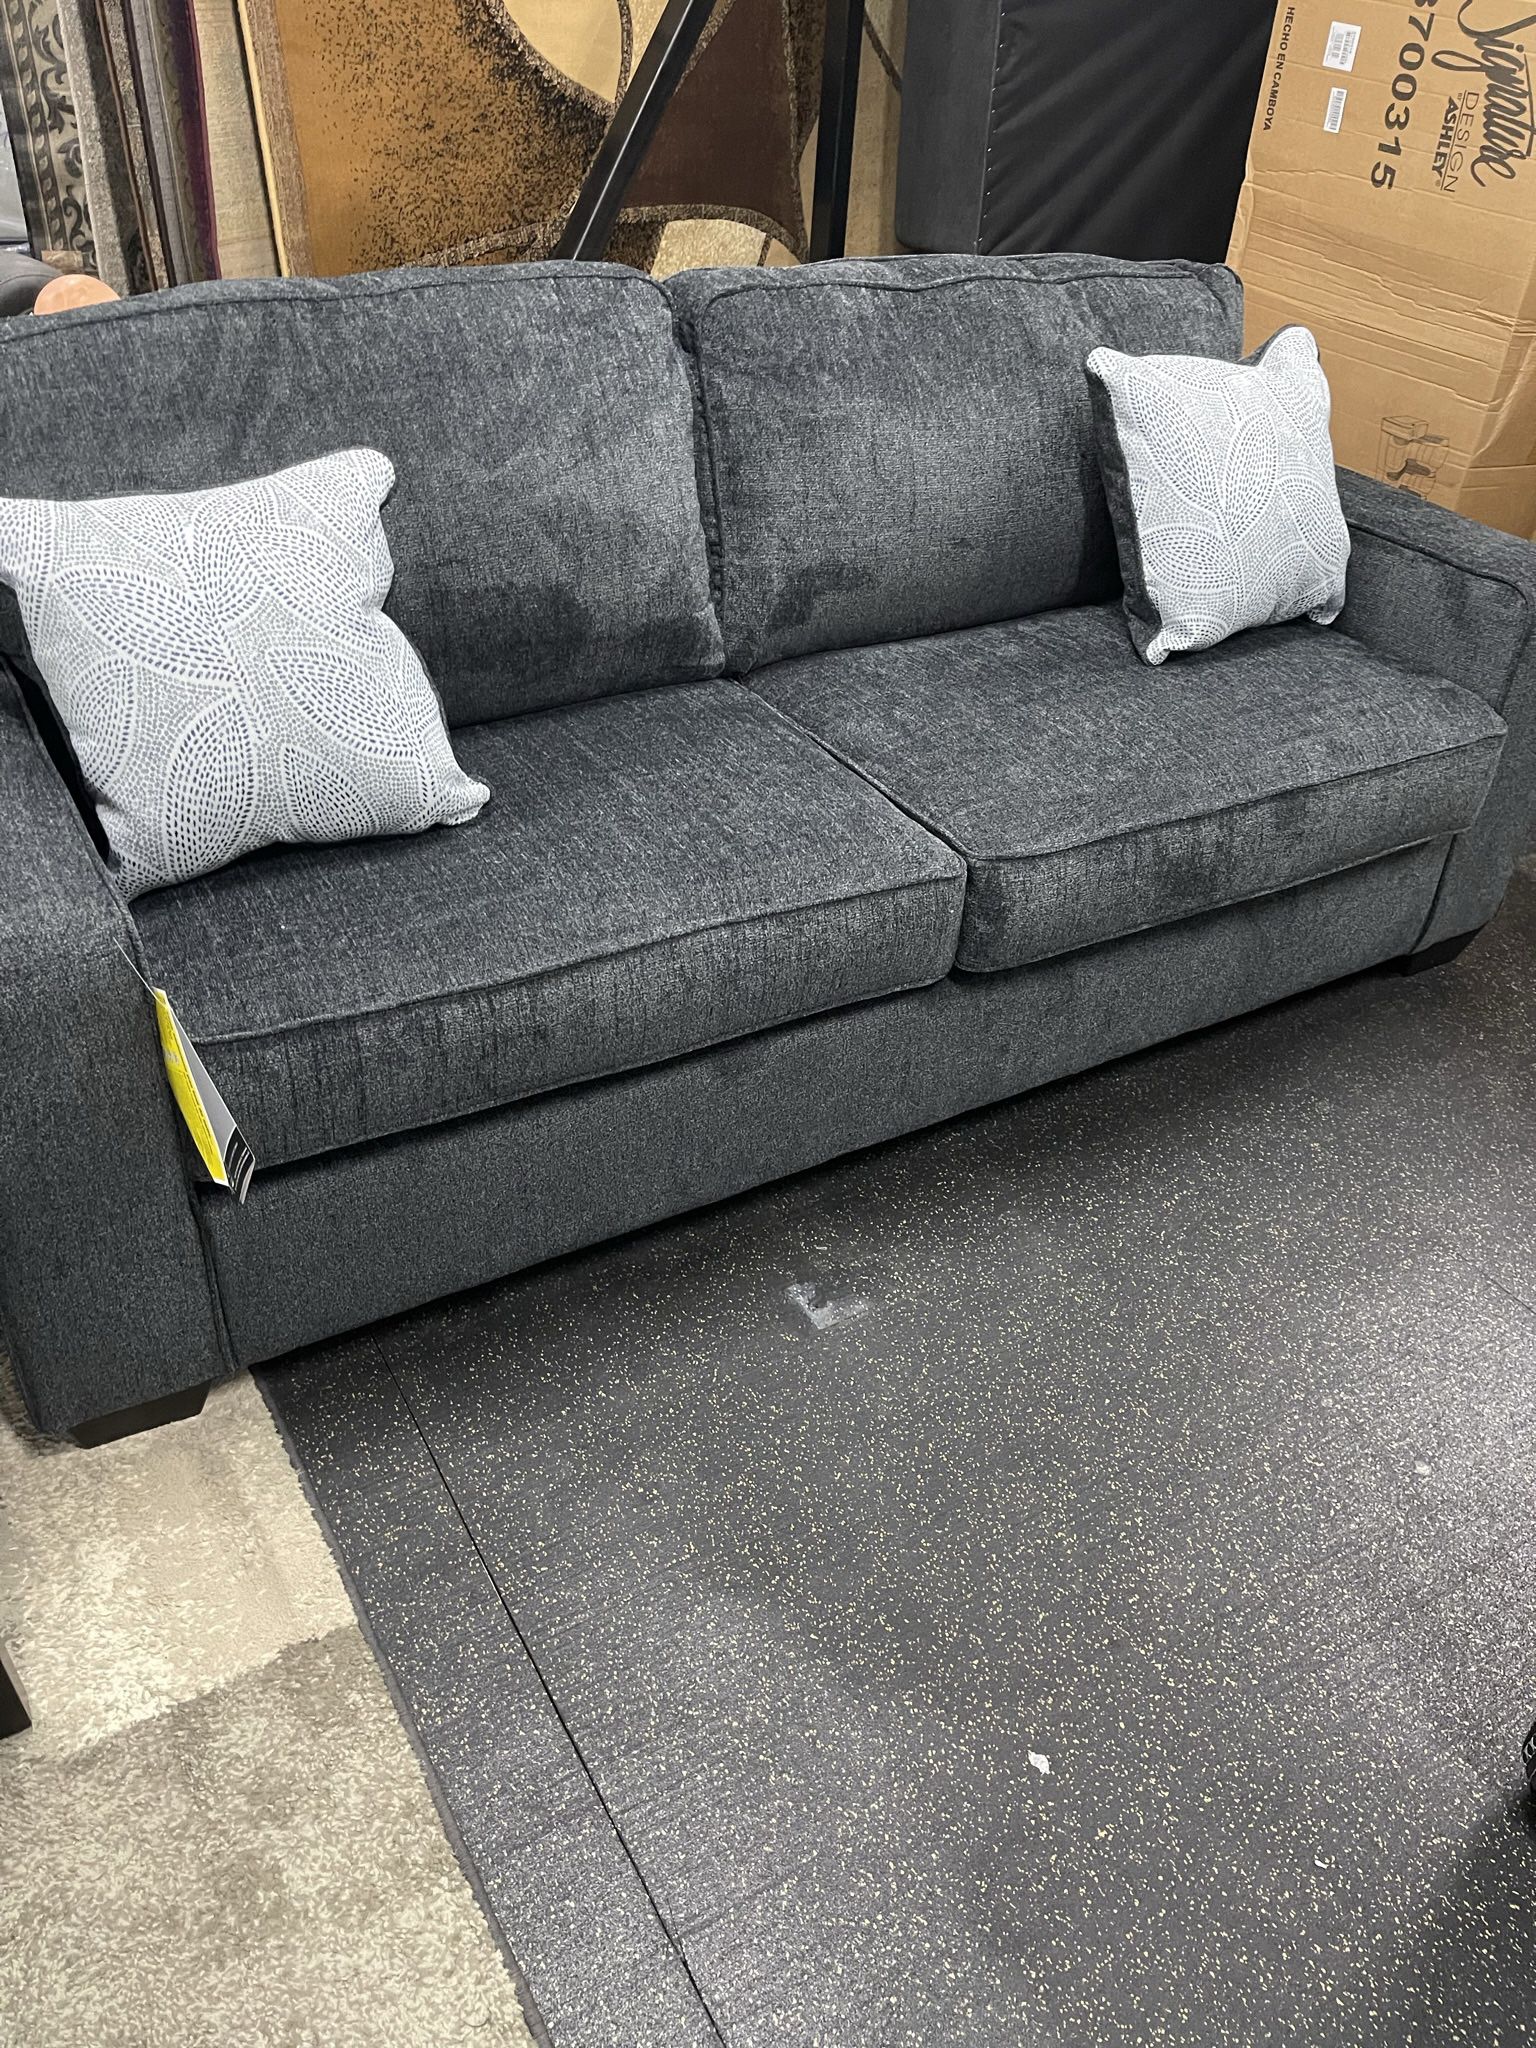 Sofa With Queen Sleeper On Sale